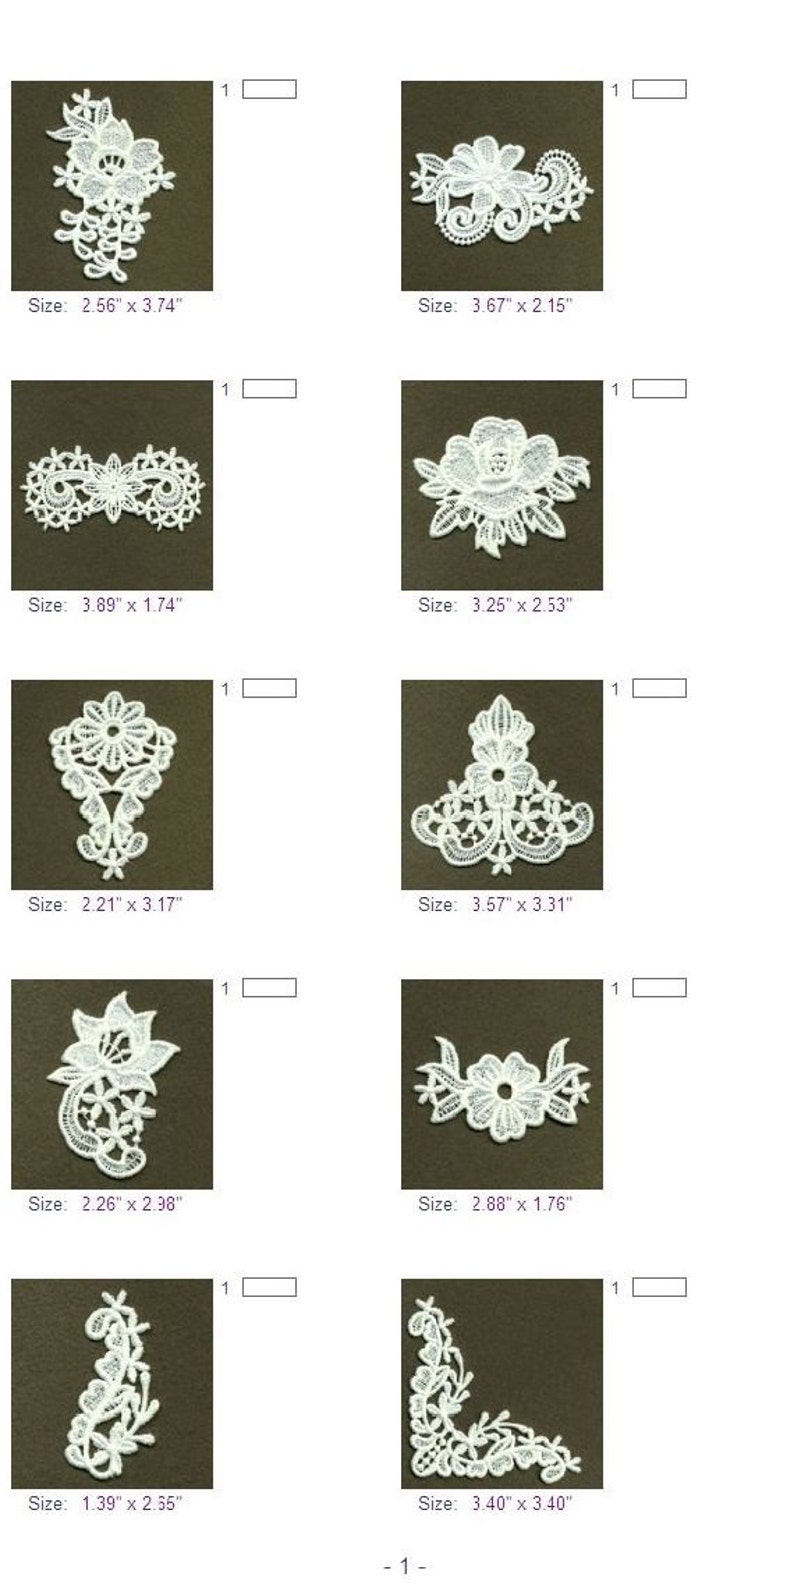 FSL Flowers Ornament Free Standing Lace Machine Embroidery - Etsy